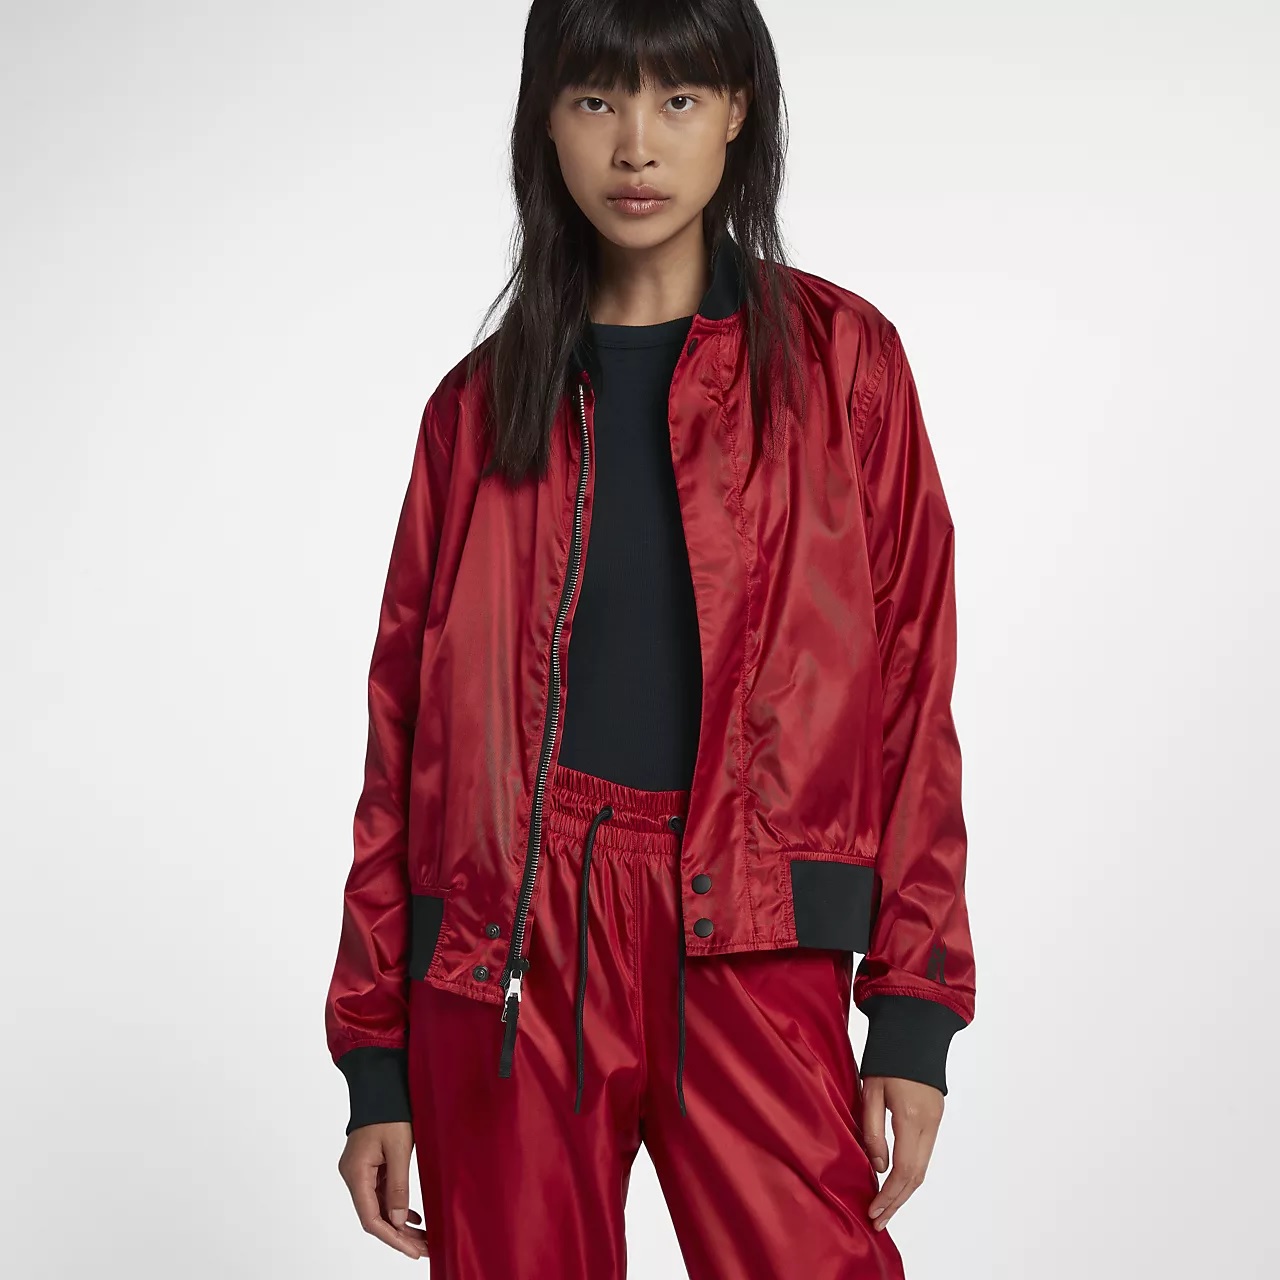 NikeLab Makes Bloody Moves With Red Bomber And Track Pants